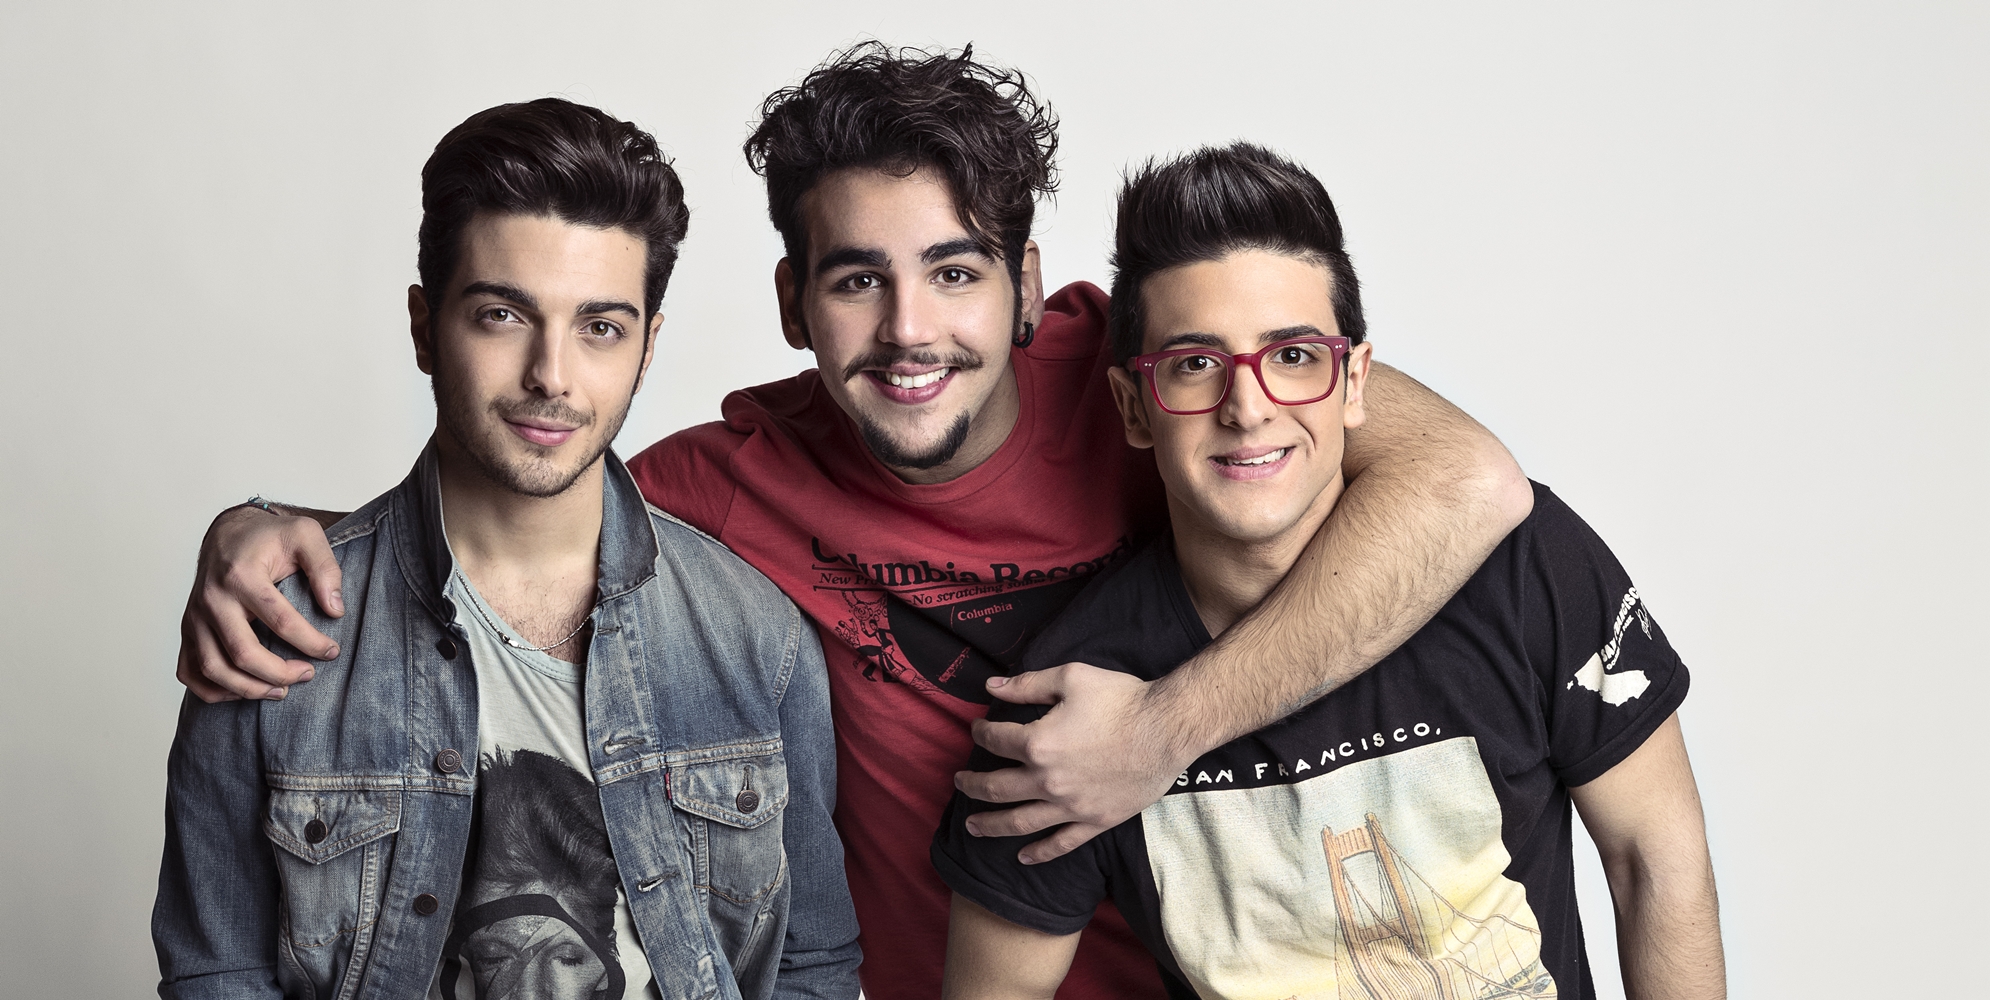 Il Volo: “We met in an Italian talent show and, since then, we are as brothers” (Italy 2015 – Exclusive Interview)